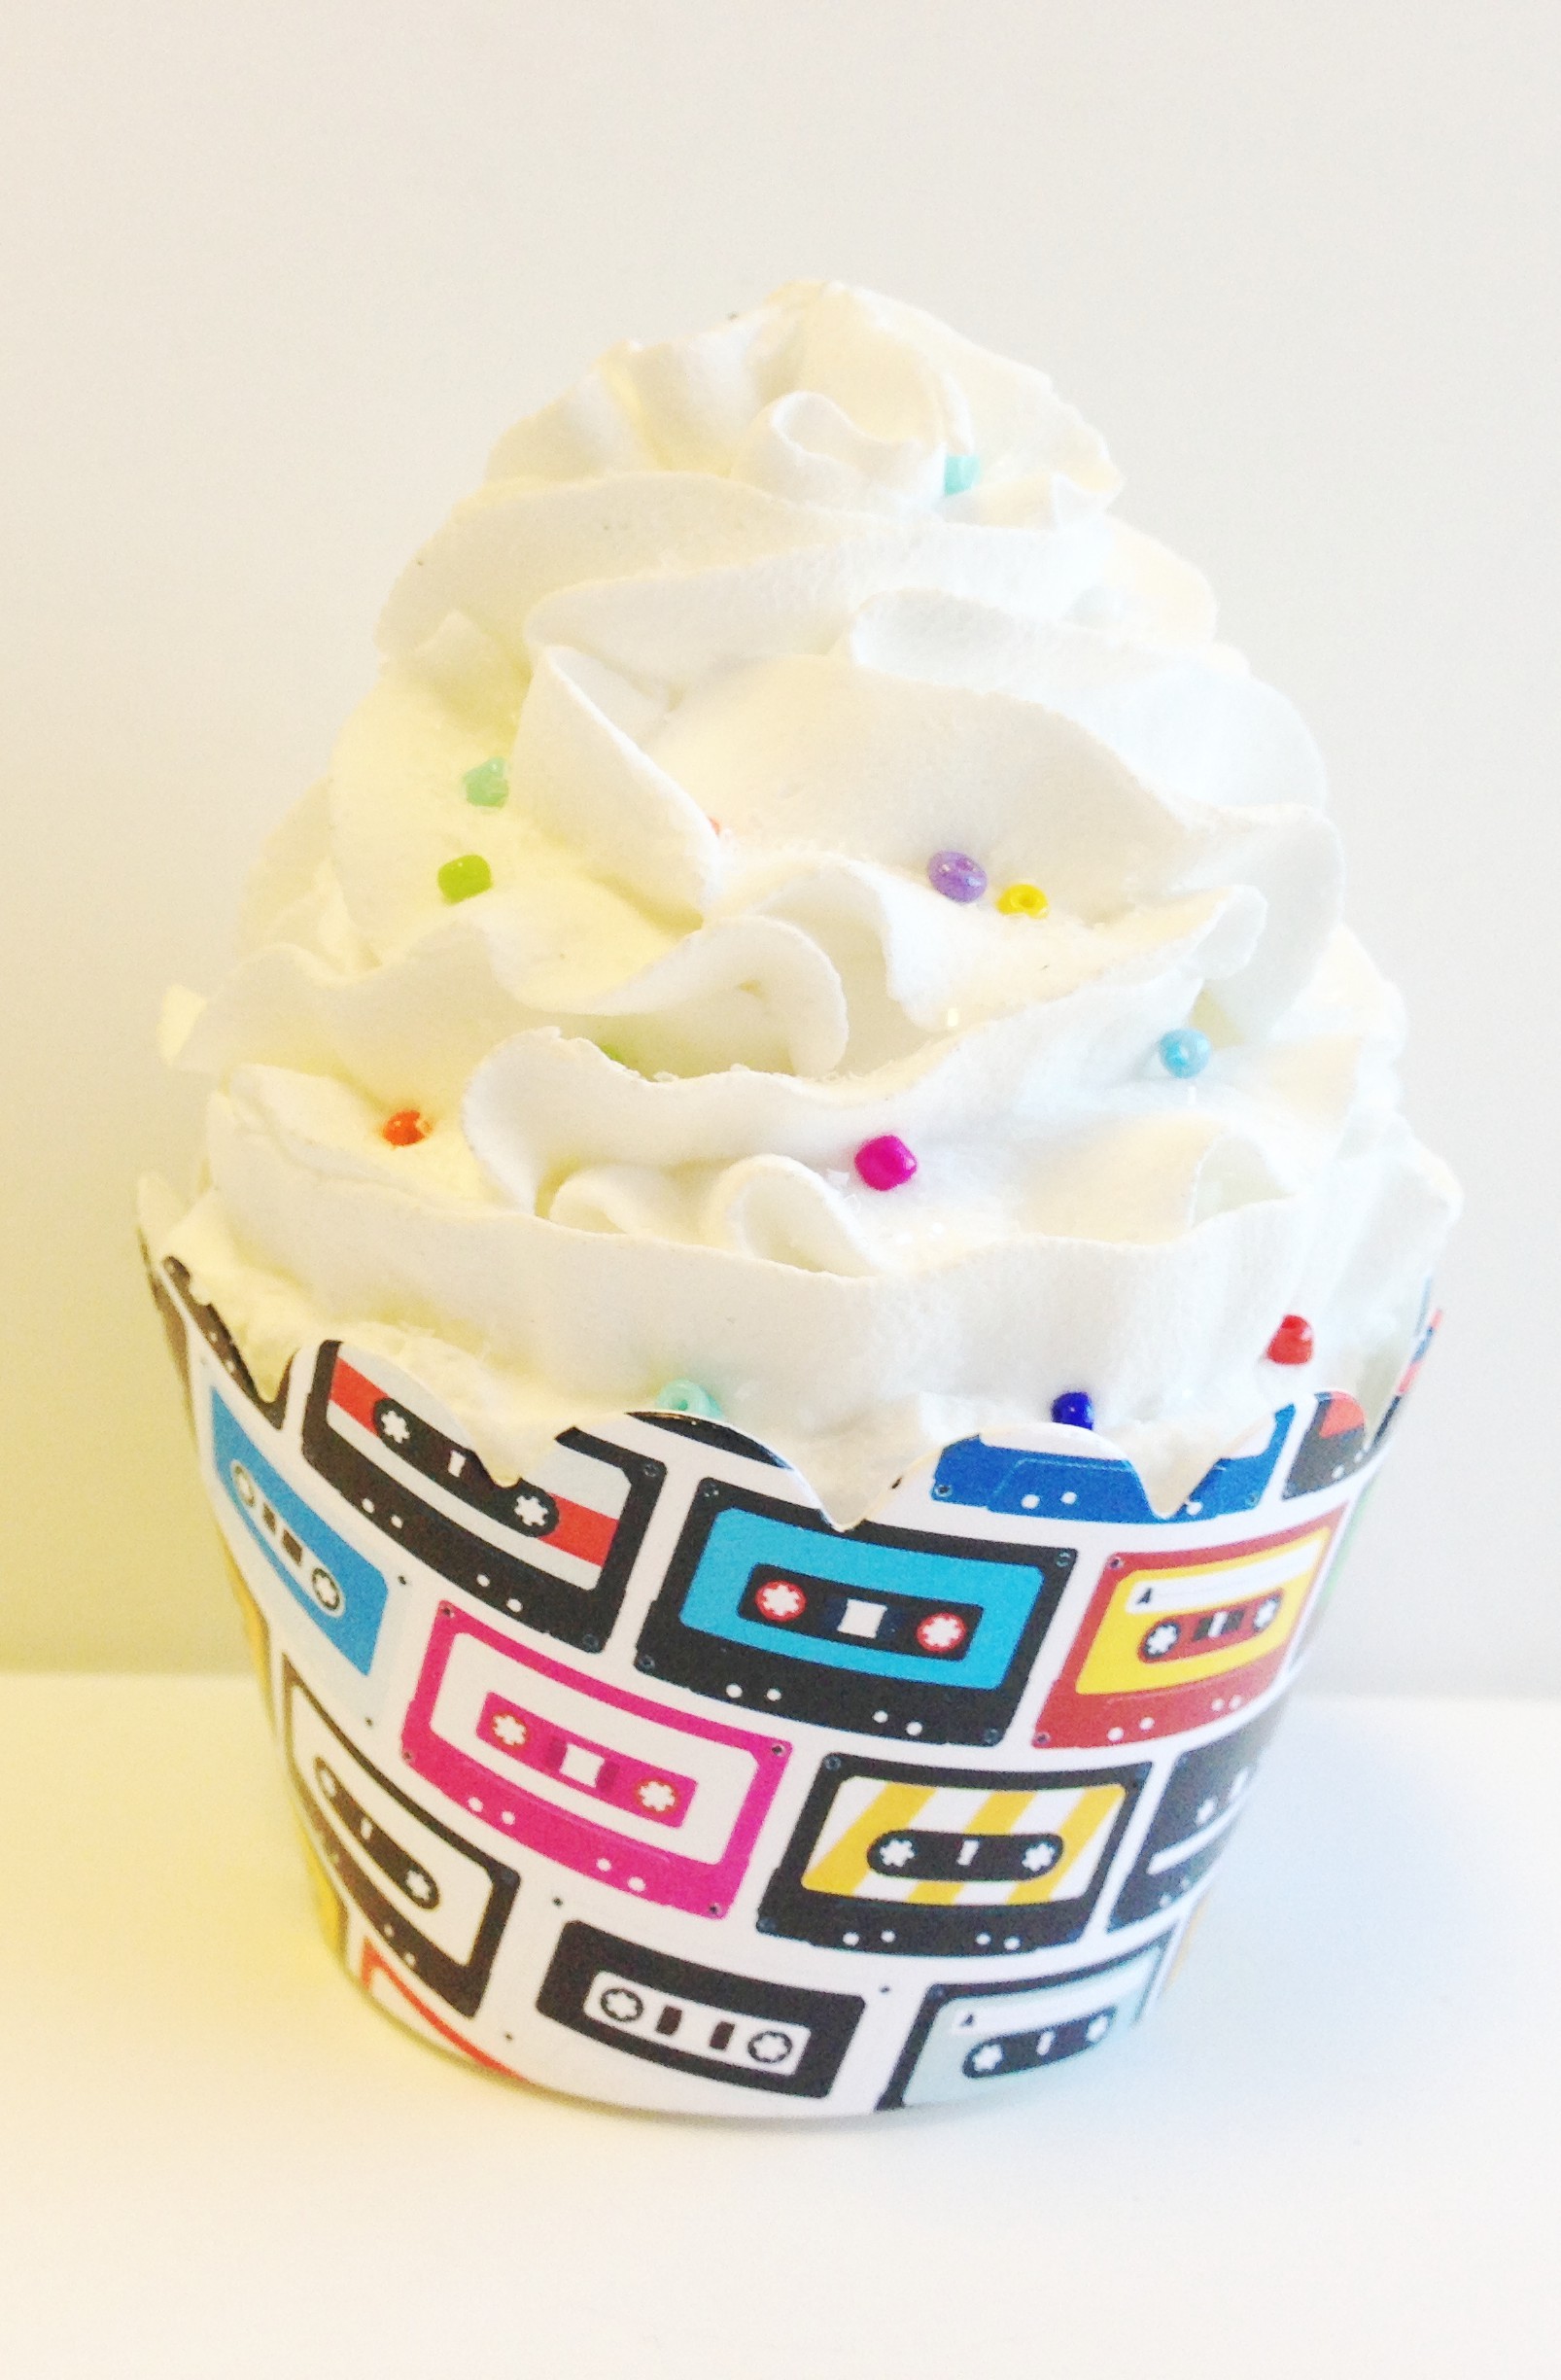 Cassette Tape 80s Theme Party Cupcake Wrappers